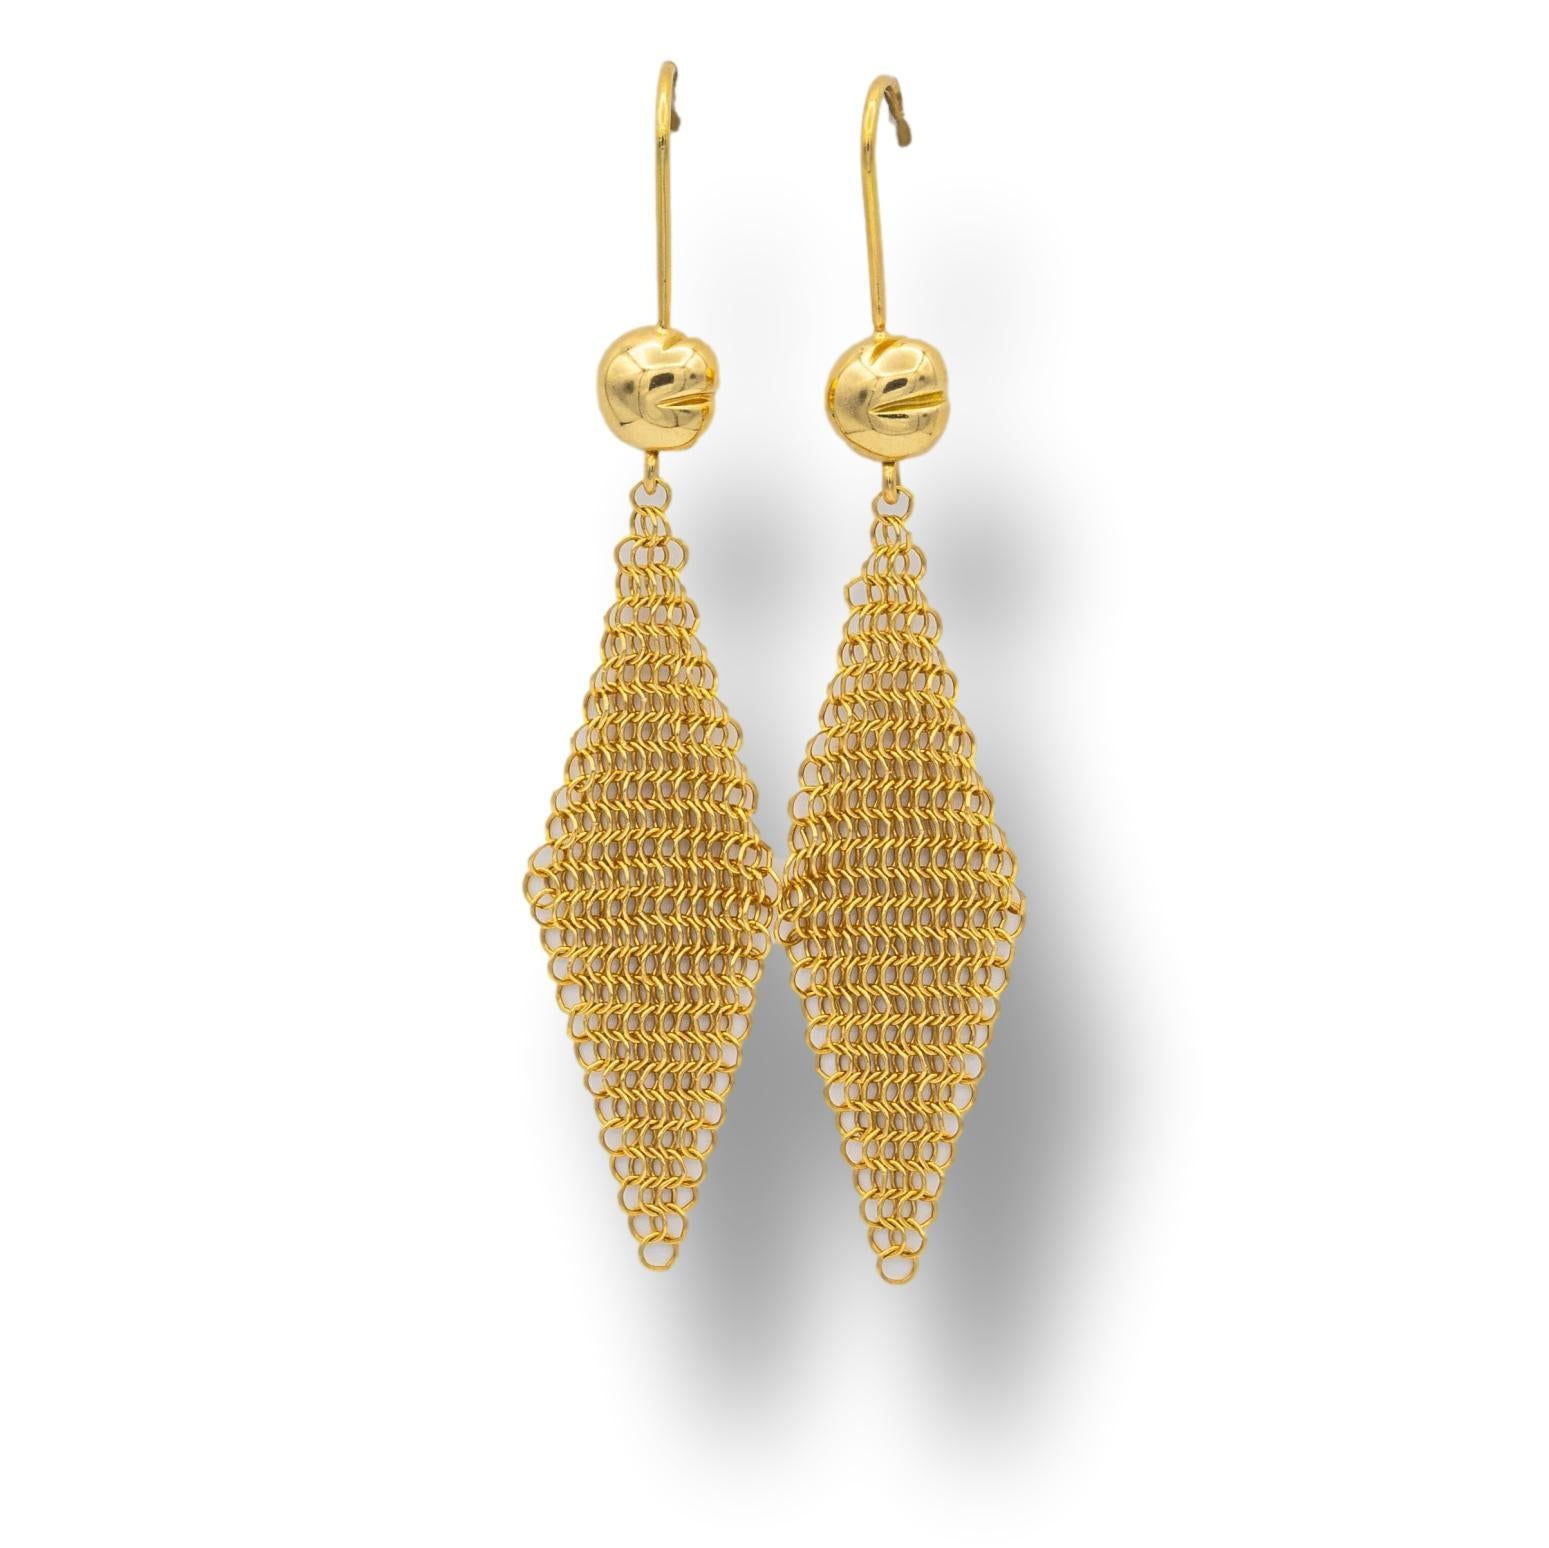 Vintage Tiffany & Co. Elsa Peretti Mesh dangle drop earrings finely crafted in 18 karat yellow gold. The earrings have a hook fastening and drop about 2